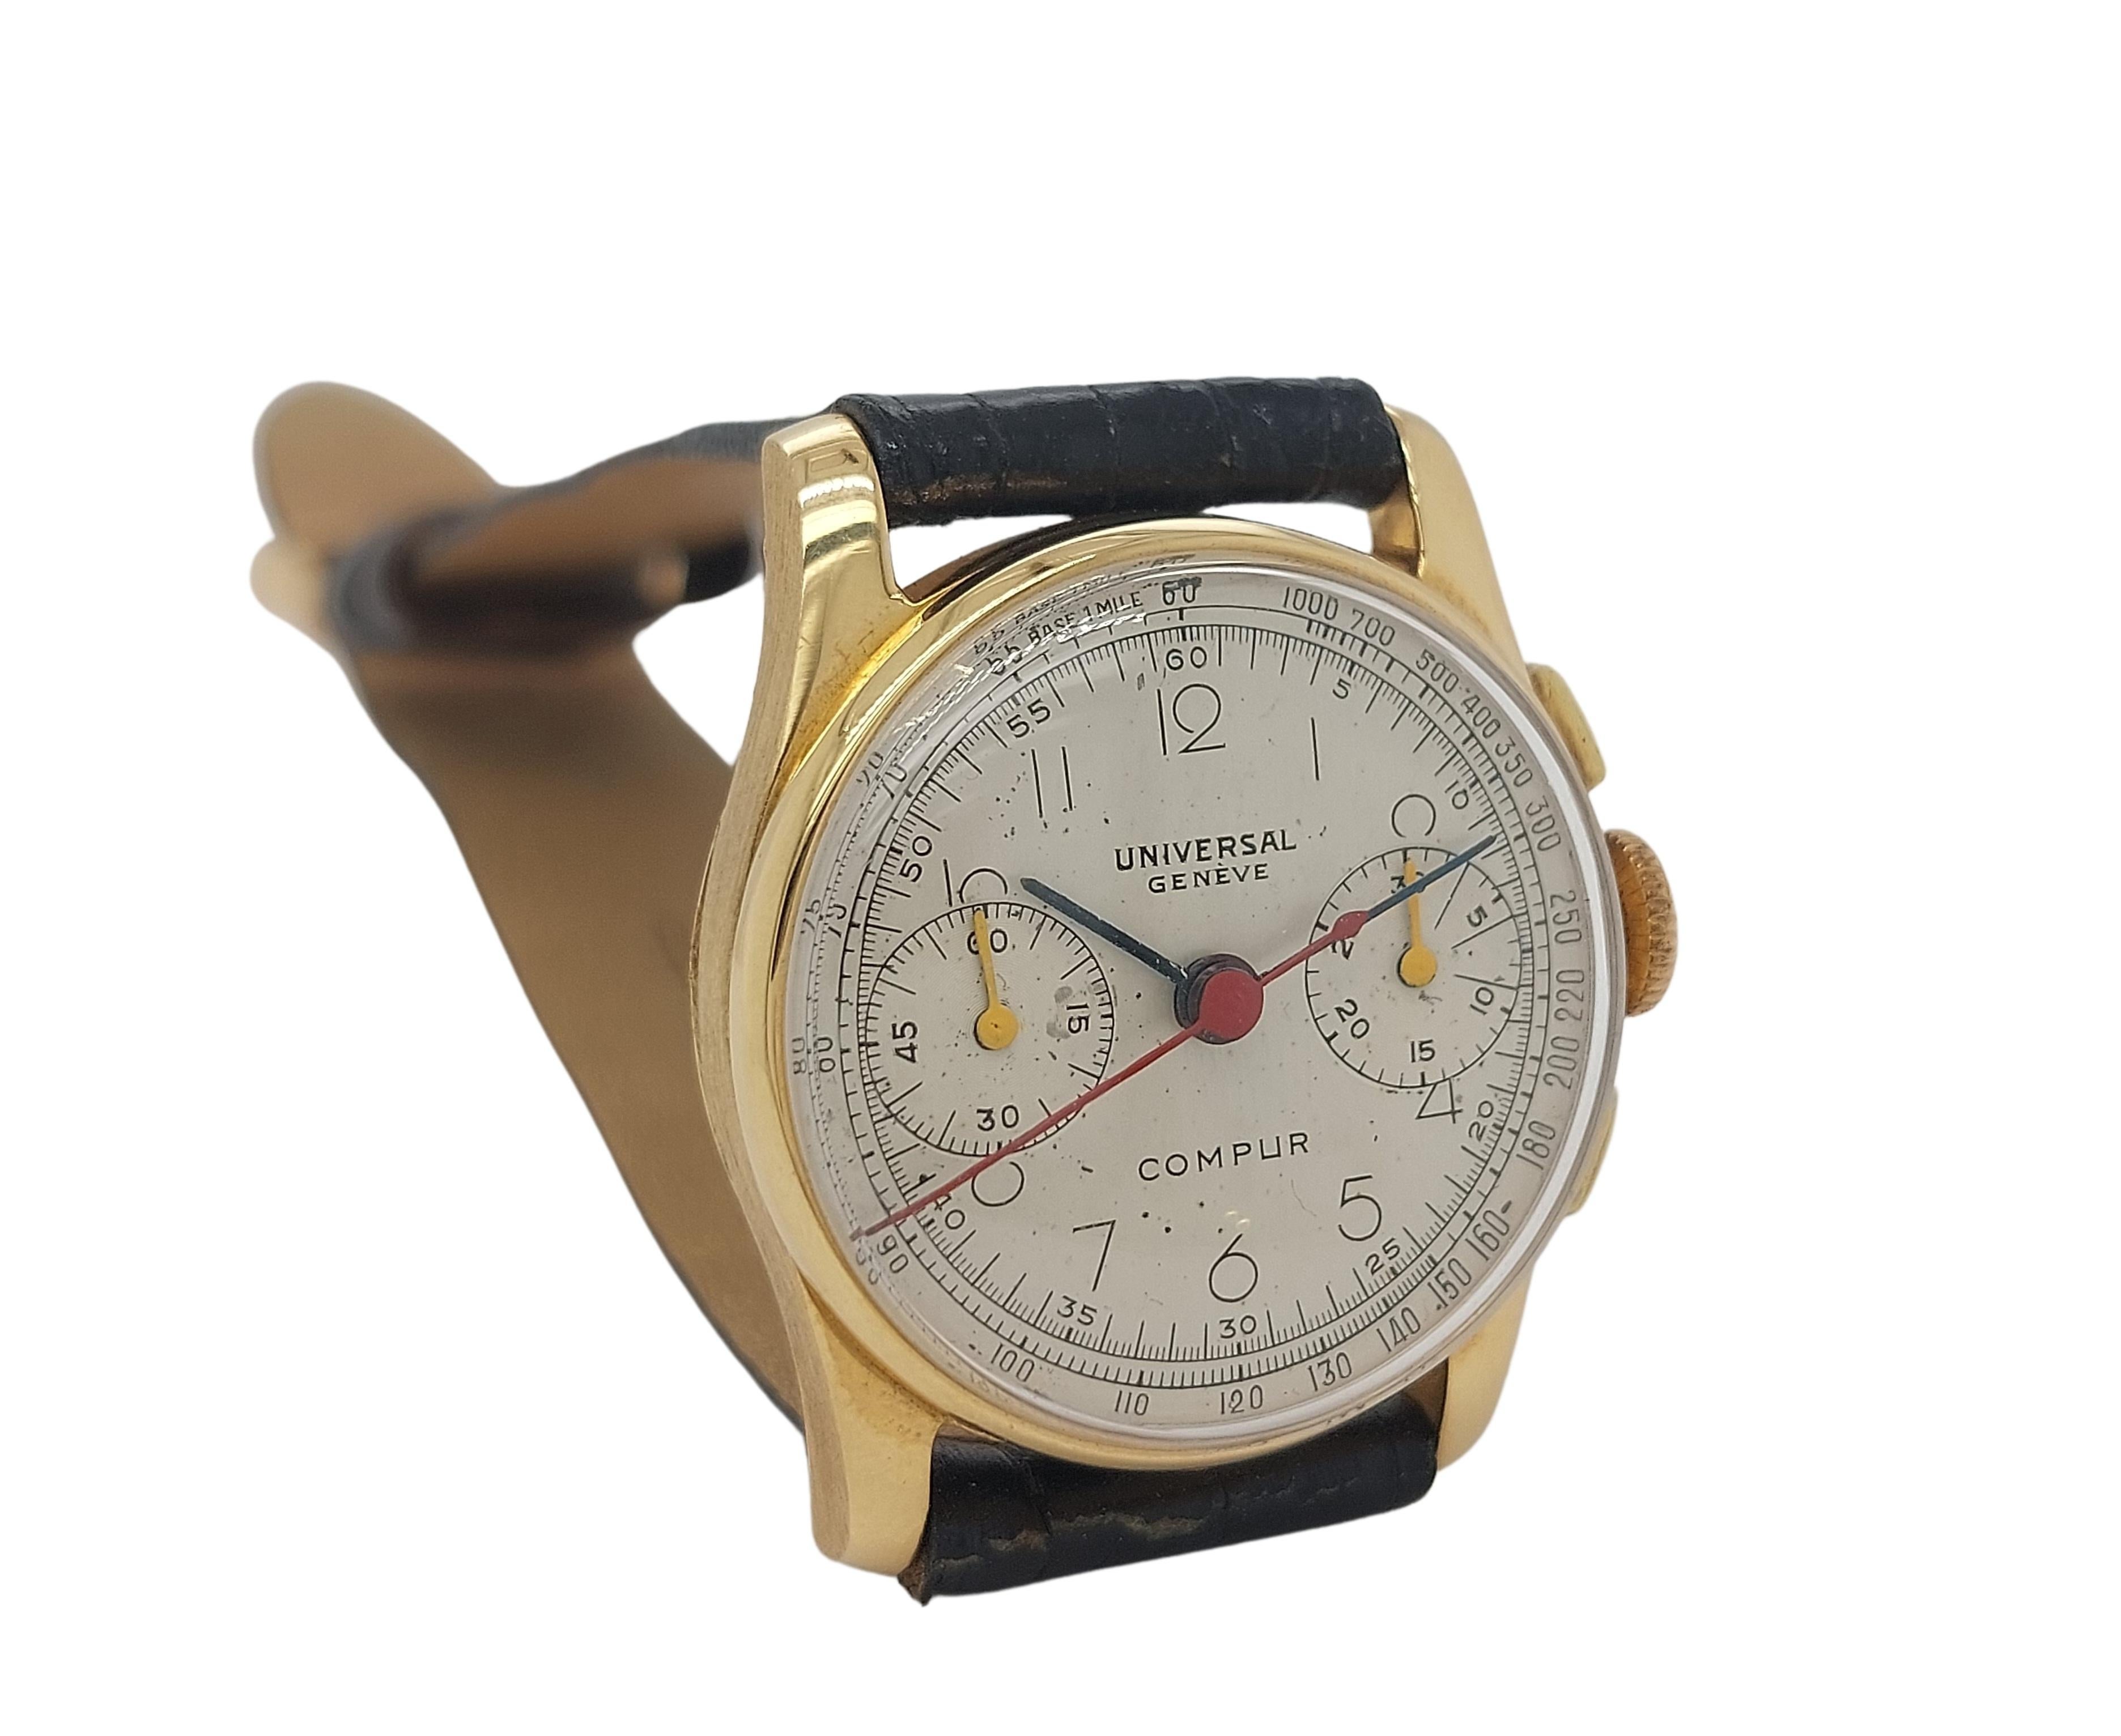 18kt Yellow Gold Universal Geneve Chronograph Watch, Extremy Rare For Sale 3